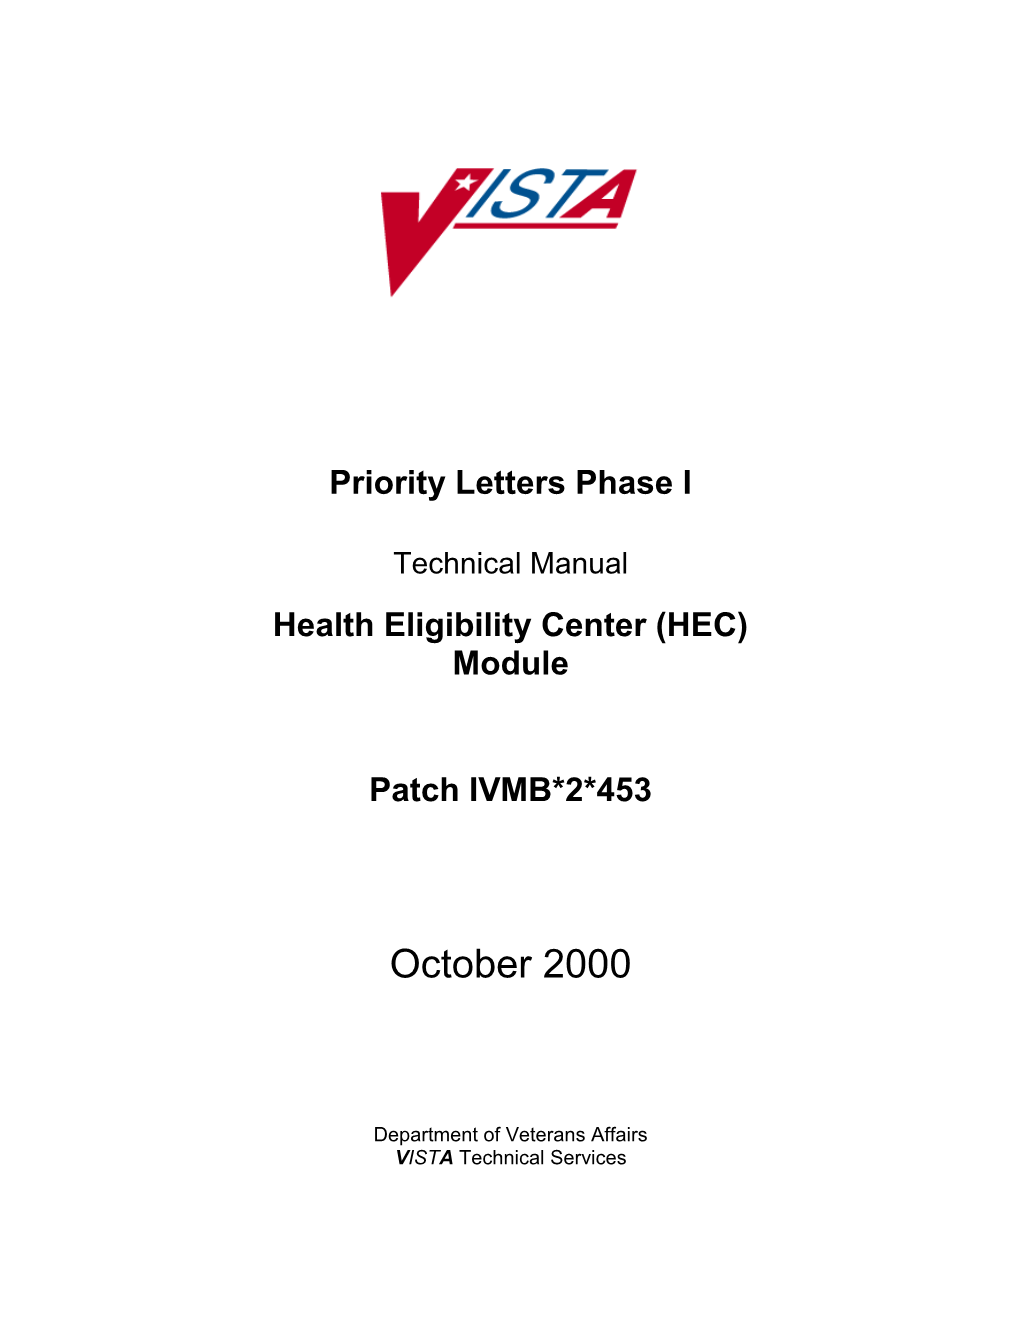 Priority Letters Phase I Technical Manual